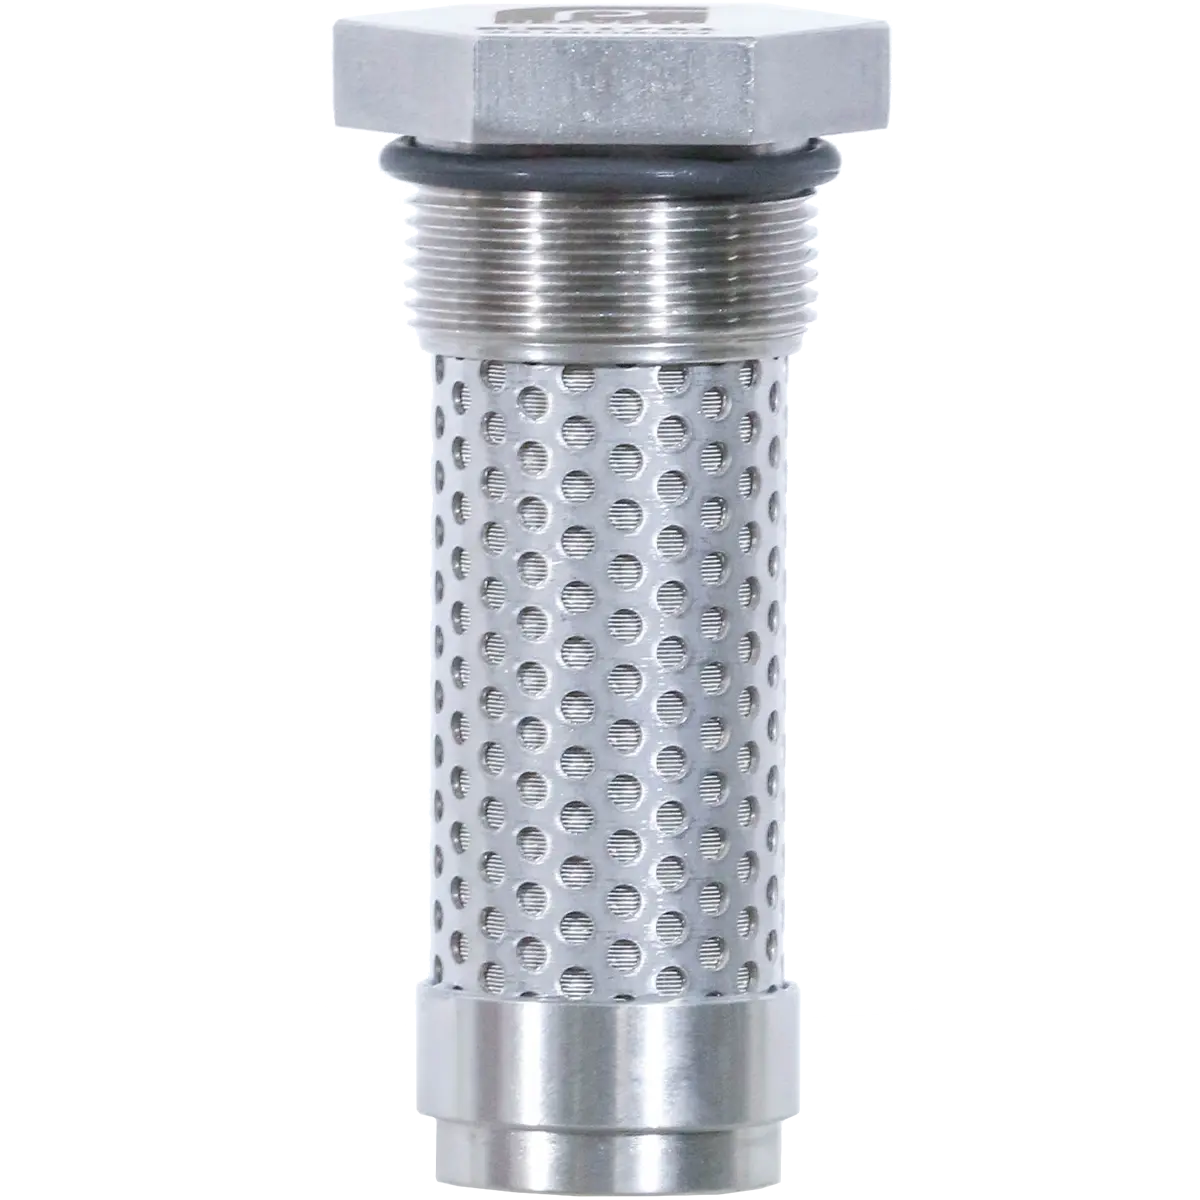 25-micron stainless steel filter element